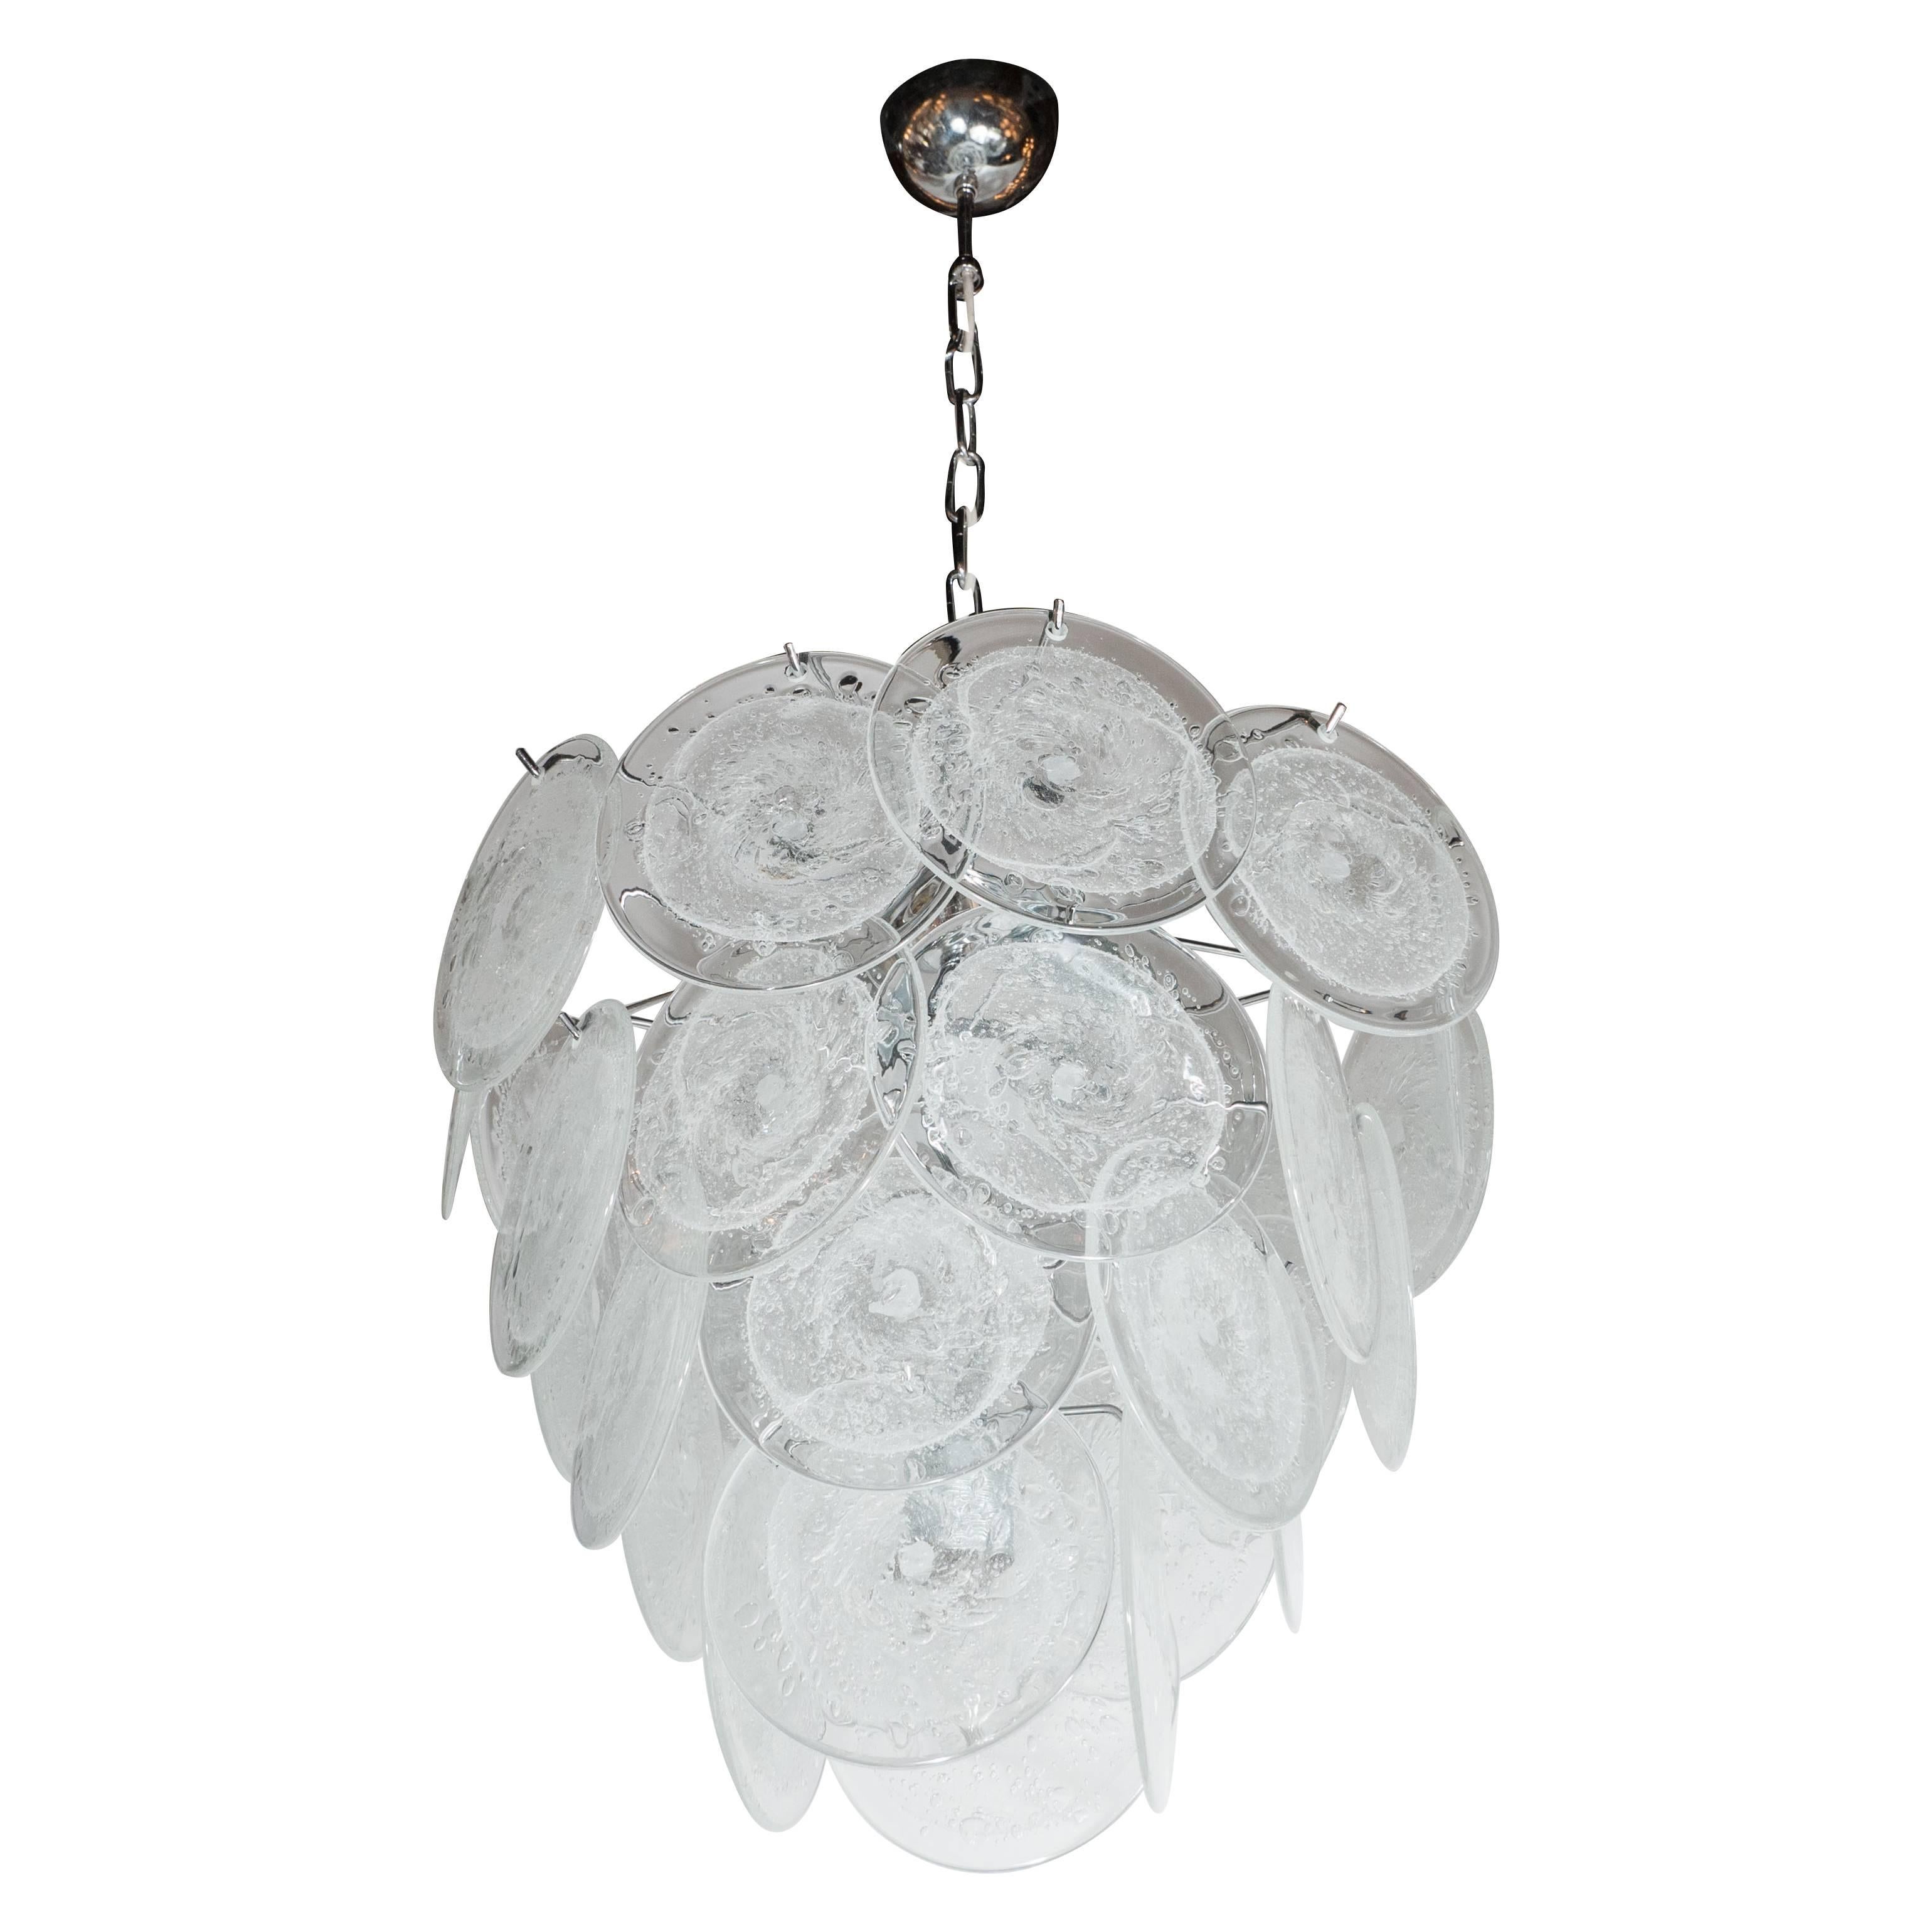 Modernist Vistosi Style Chandelier in Chrome and Textured Murano Glass Discs 